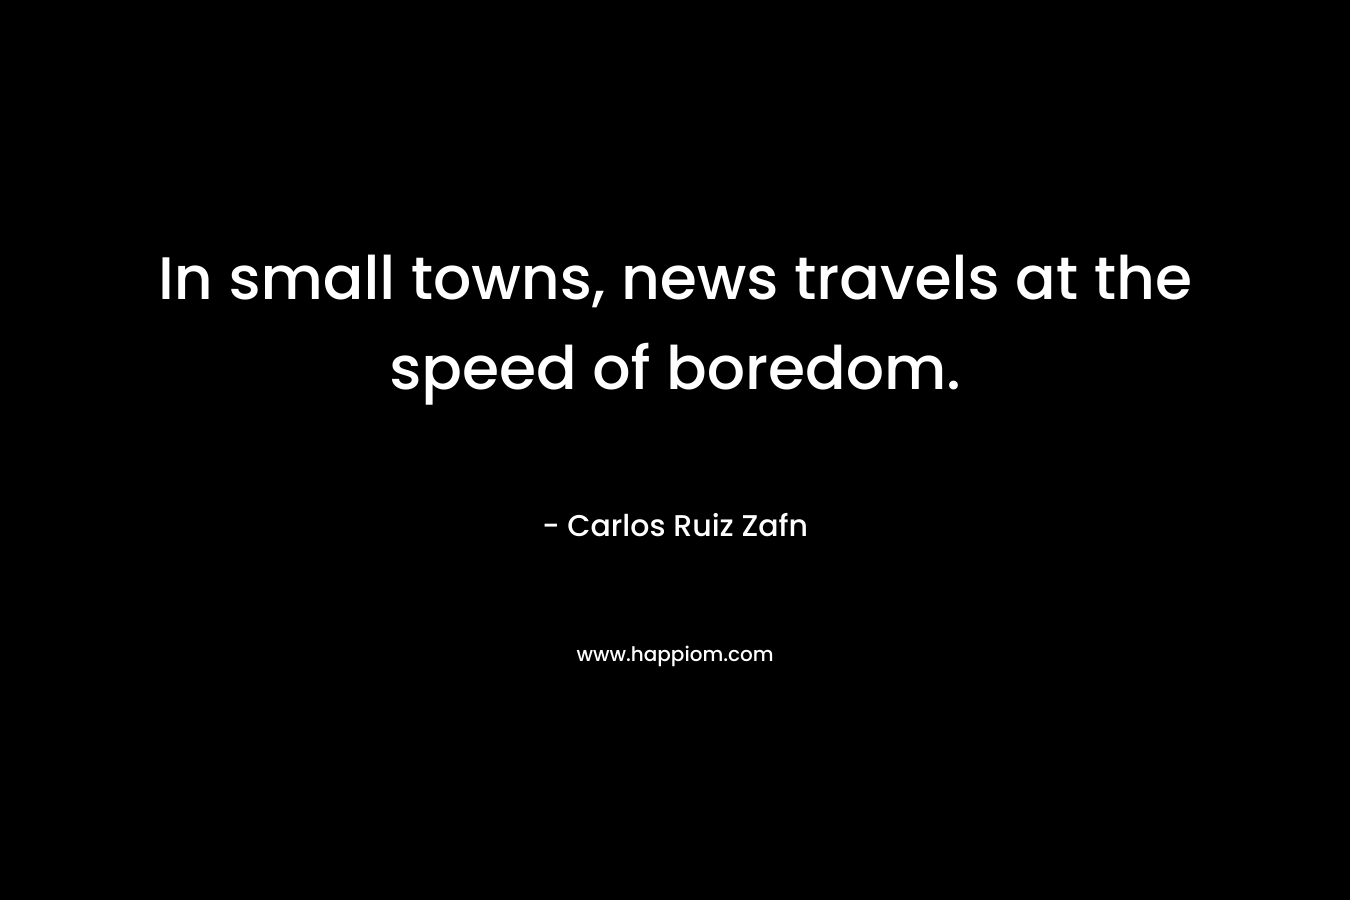 In small towns, news travels at the speed of boredom.